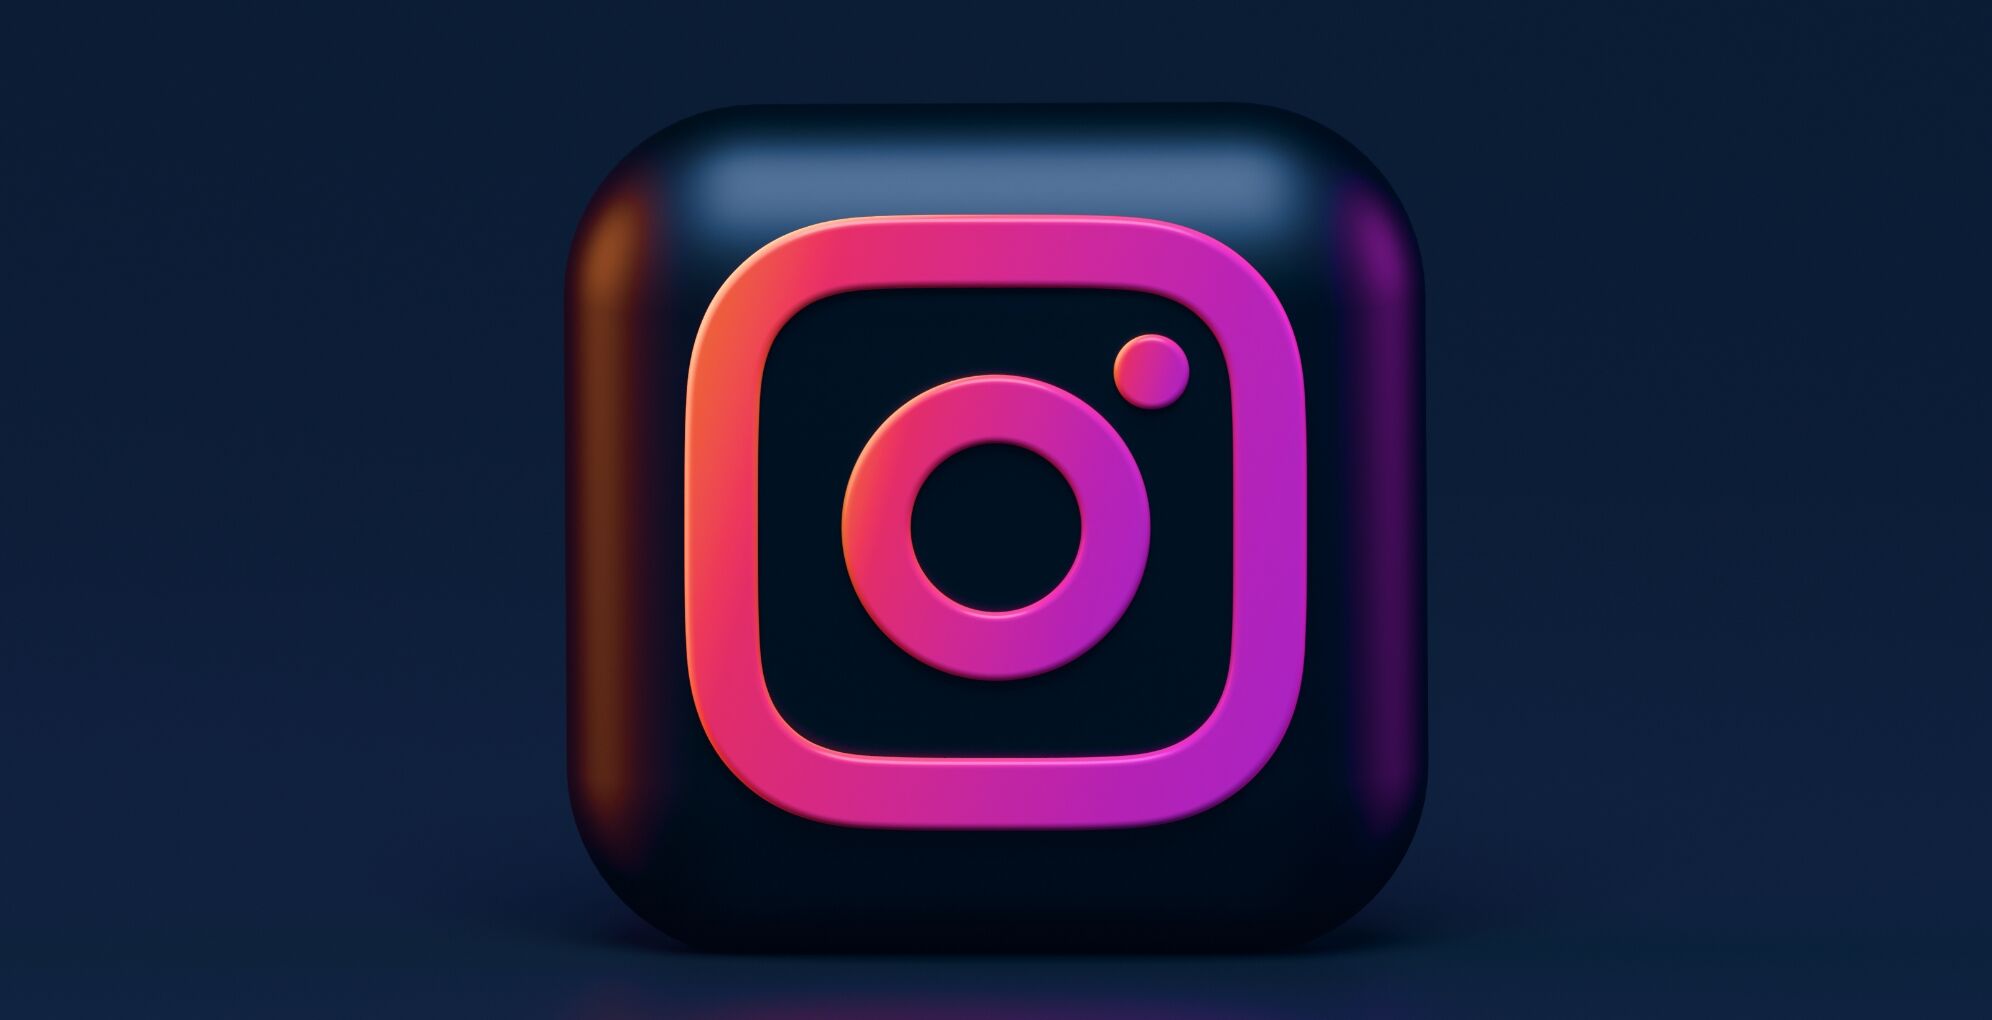 Instagram blue and red square logo.